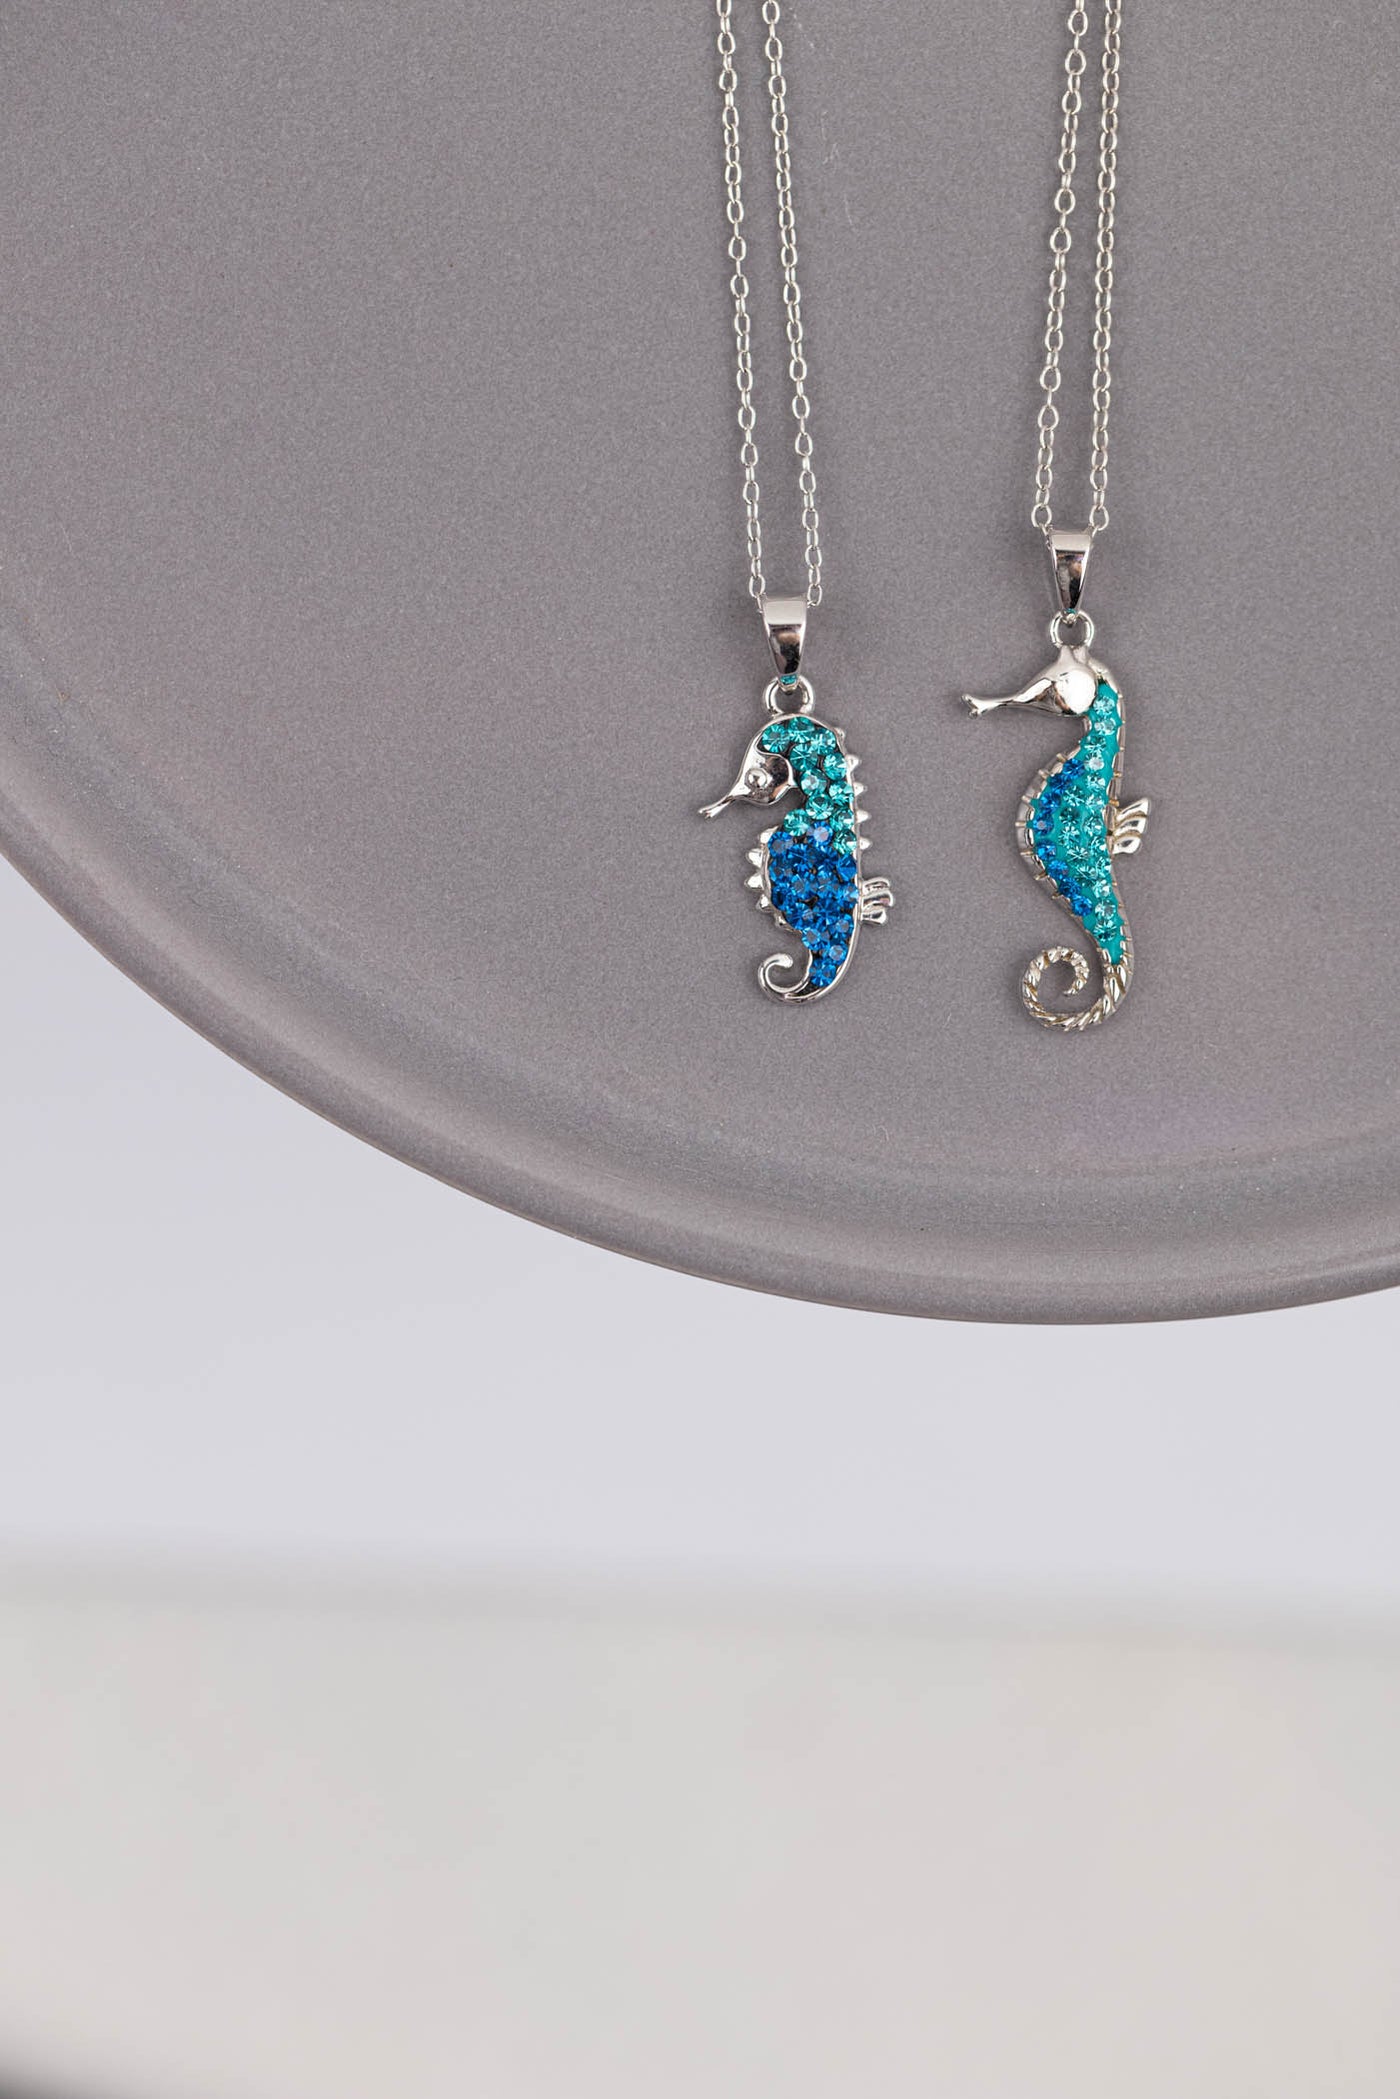 Baby Seahorse Crystal Sterling Silver Necklace